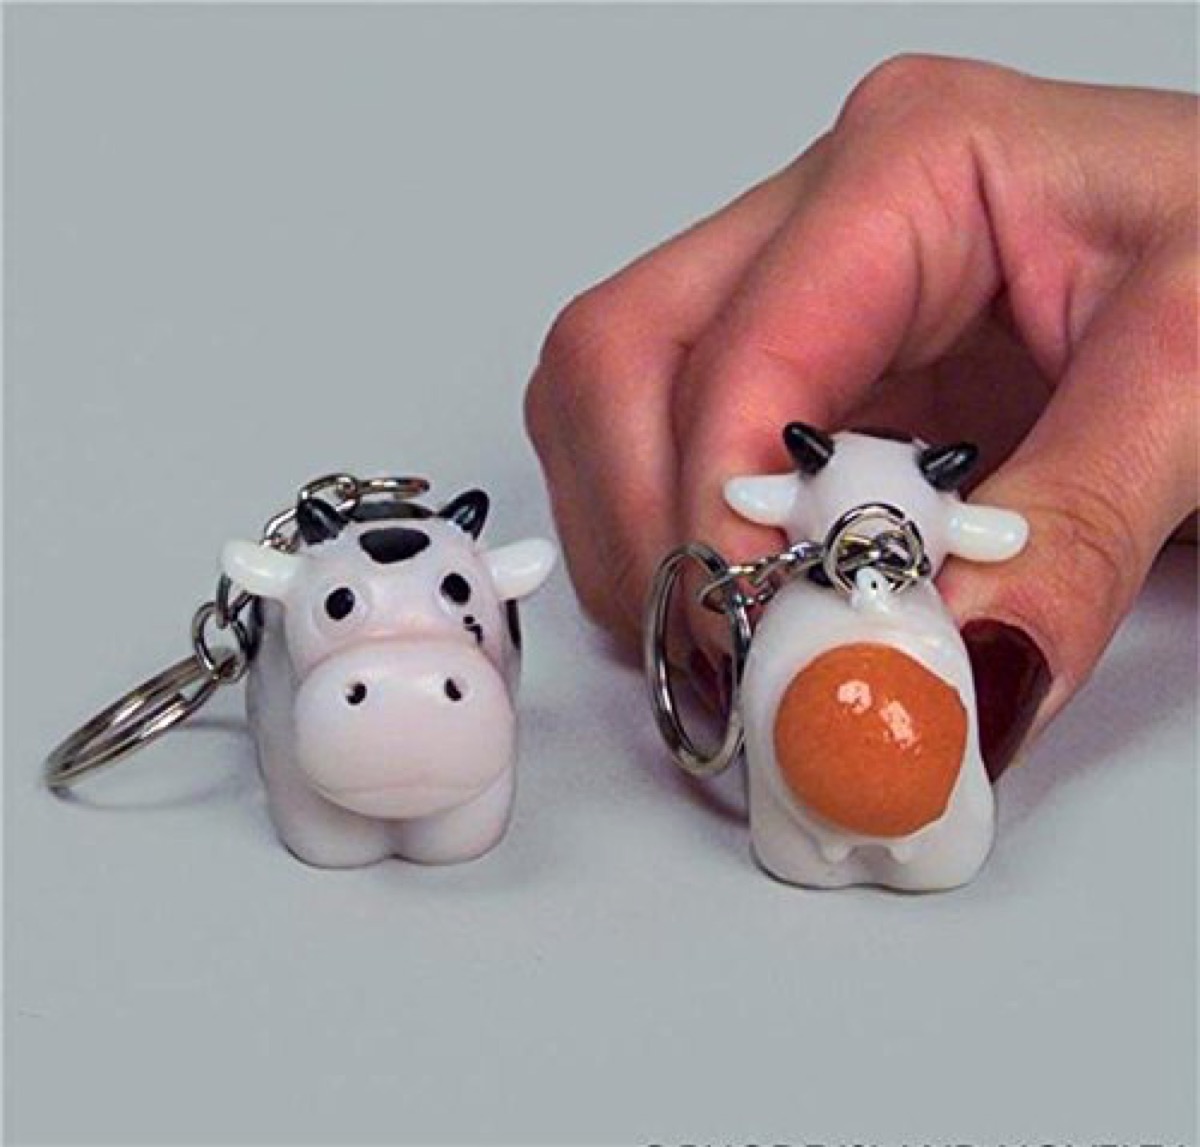 naughty cow keychain coolest school accessory every year